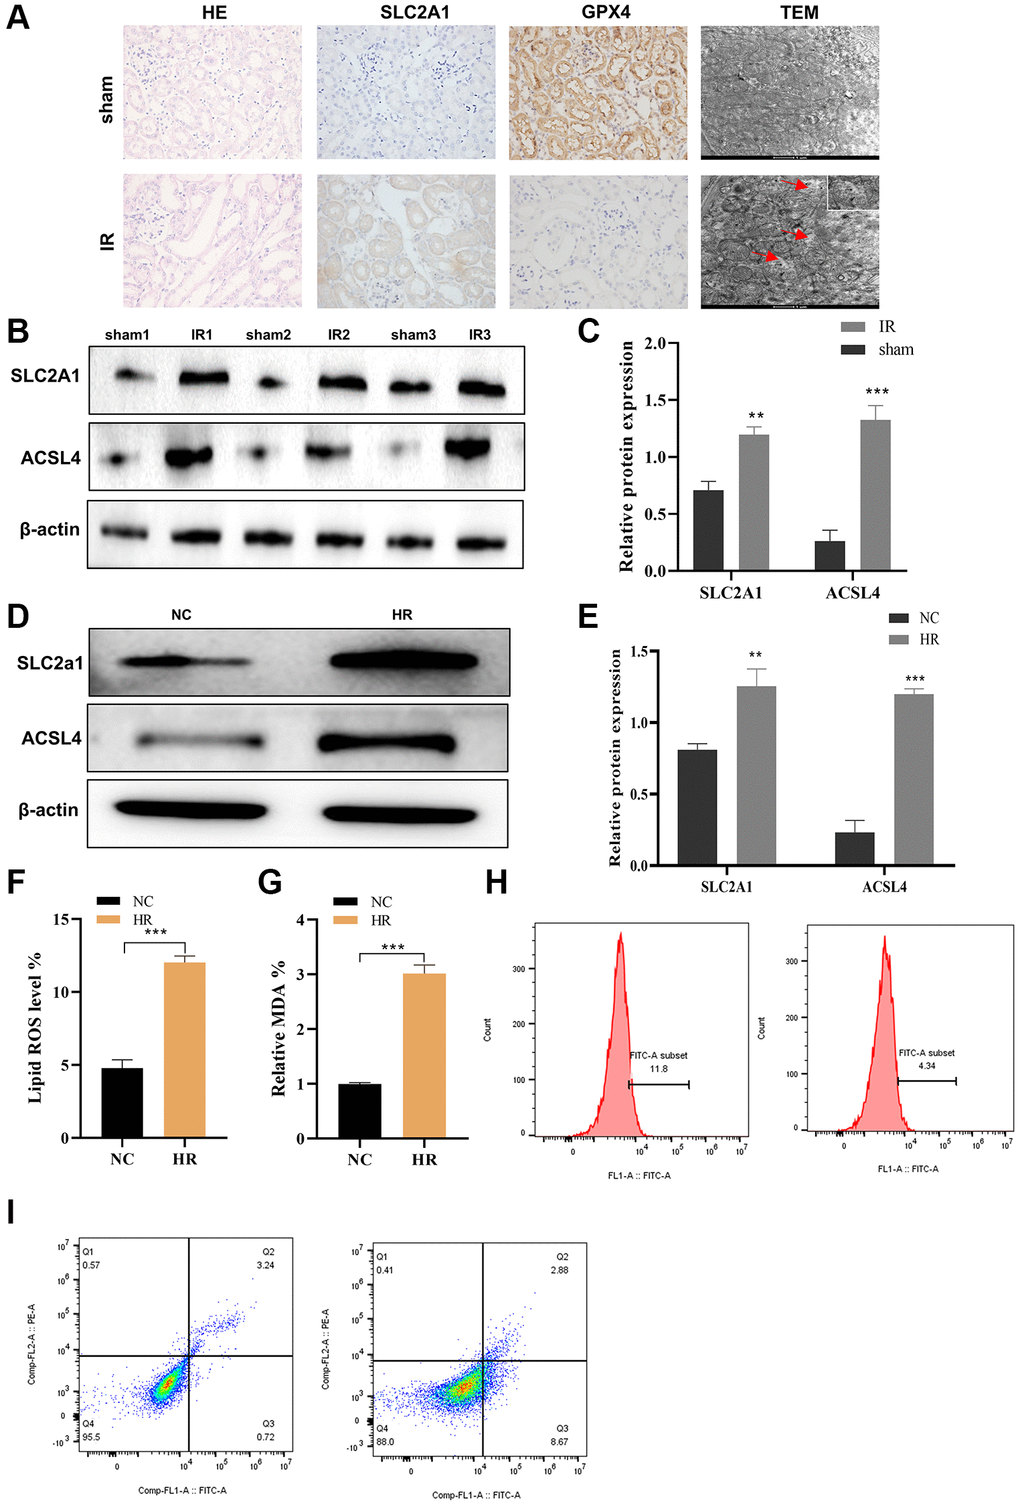 SLC2A1 and ACSL4 were overexpressed in AKI and promote HK-2 cell apoptosis. (A) HE and immunohistochemistry of SLC2A1, GPX4 and TEM in renal ischemia-reperfusion injury model; (B) The protein level of SLC2A1 and ACSL4 in renal ischemia-reperfusion injury model and normal control model was verified by Western blot; (C) Relative quantification of SLC2A1 and ASCL4 in B; (D) The protein level of ACSL4 and SLC2A1 in HR induced AKI model and was verified by Western blot; (E) Relative quantification of these proteins in D; (F) The lipid ROS level was verified in HR induced AKI model and normal control model; (G) The MDA level was verified in HR induced AKI model and normal control model; (H, I) The apoptosis rate was verified in HR induced AKI model and normal control model. *p **p ***p 